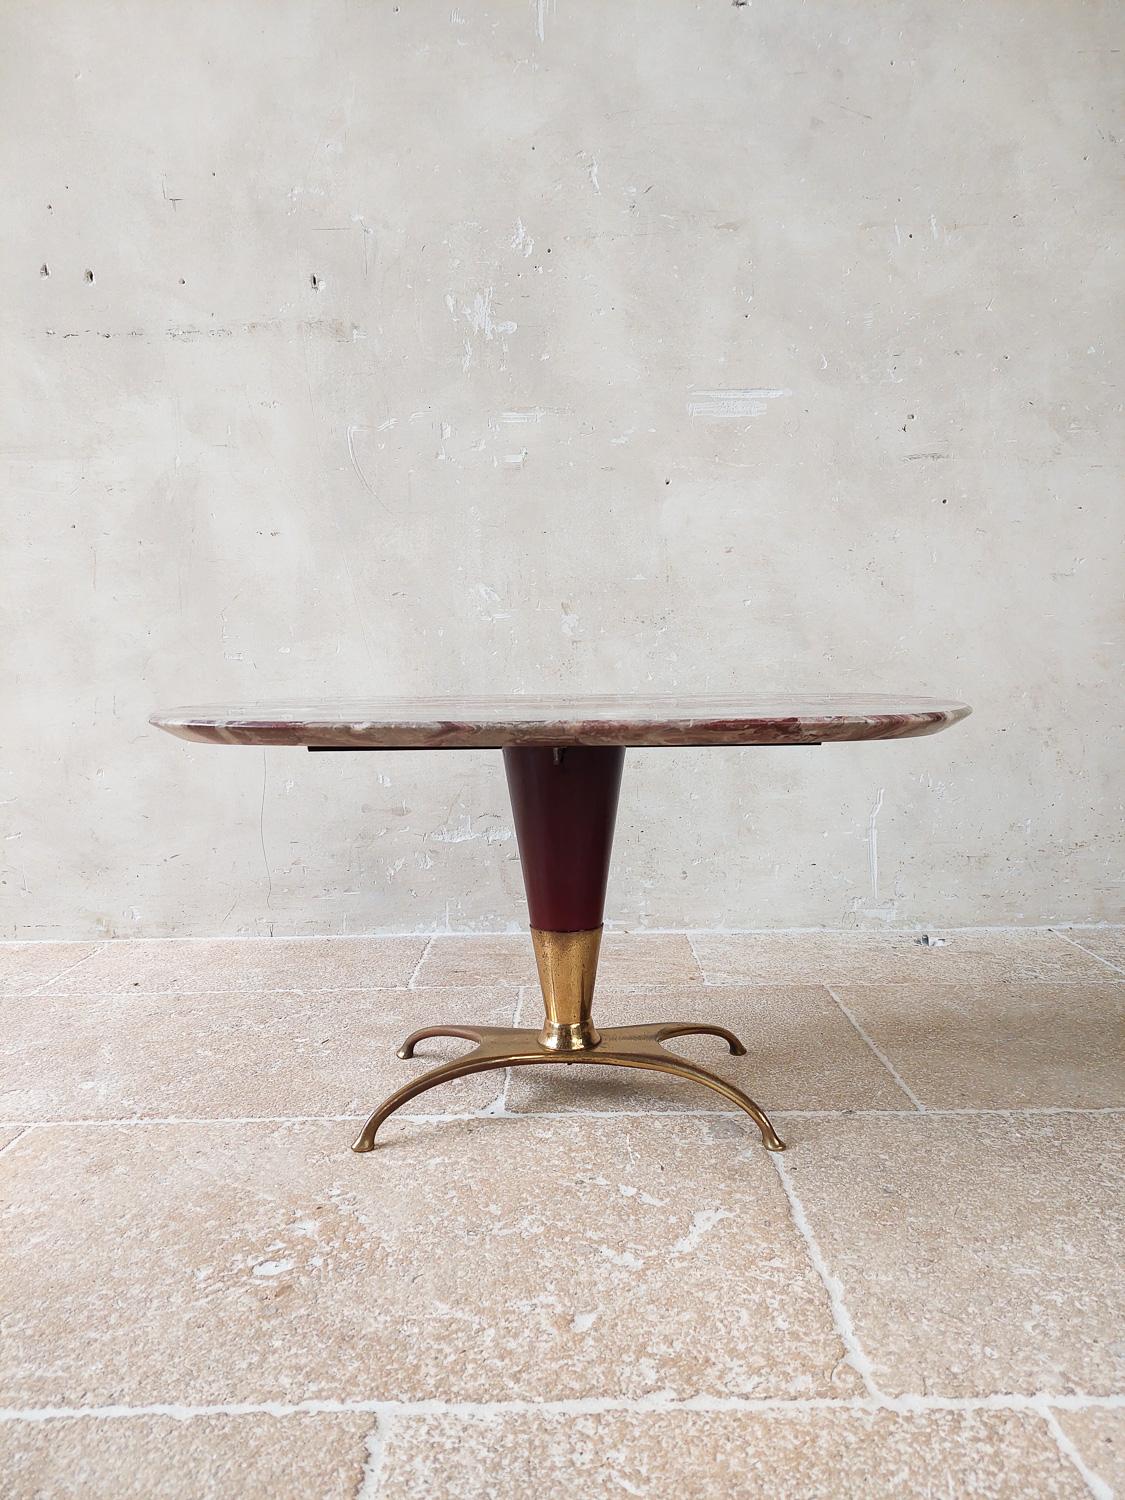 Mid-century Italian brass and marble coffee table  from the 1950s. This stylish vintage table has a beautiful red and grey marble top on a red base with a brass foot, Osvaldo Borsani style.

Measures: L75 x B 47 x H 40 cm